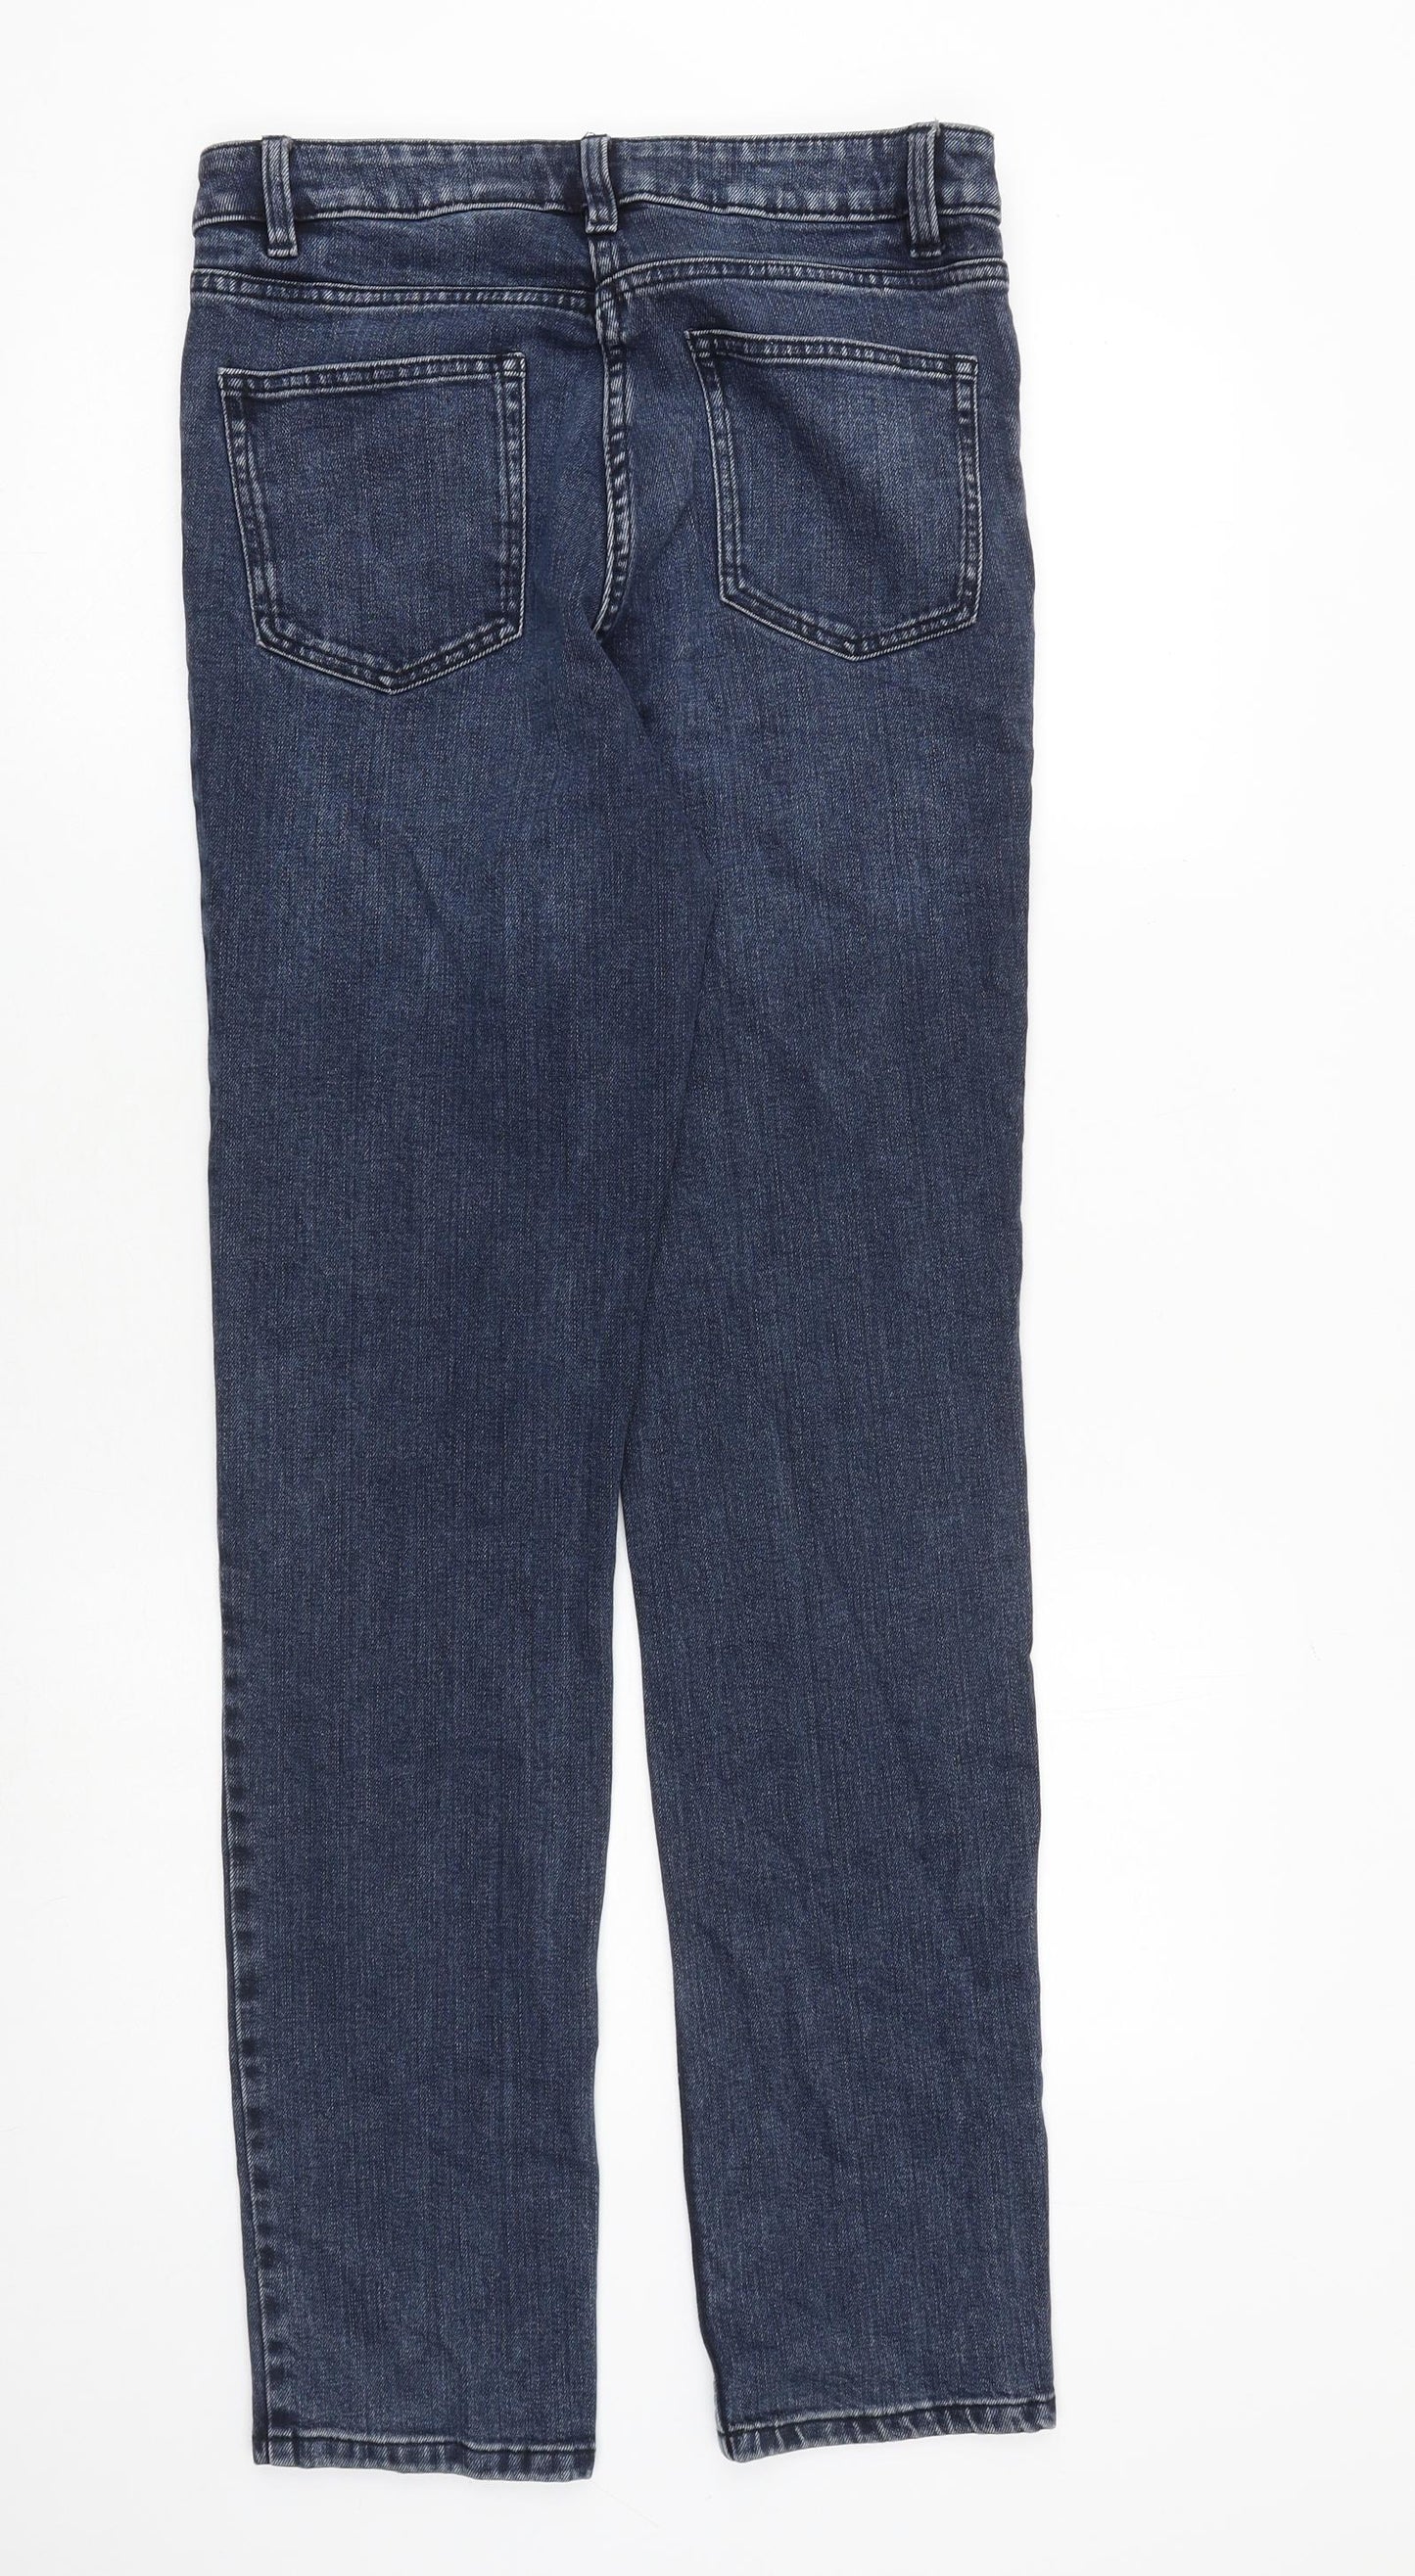 NEXT Womens Blue Cotton Straight Jeans Size 10 L32 in Regular Zip